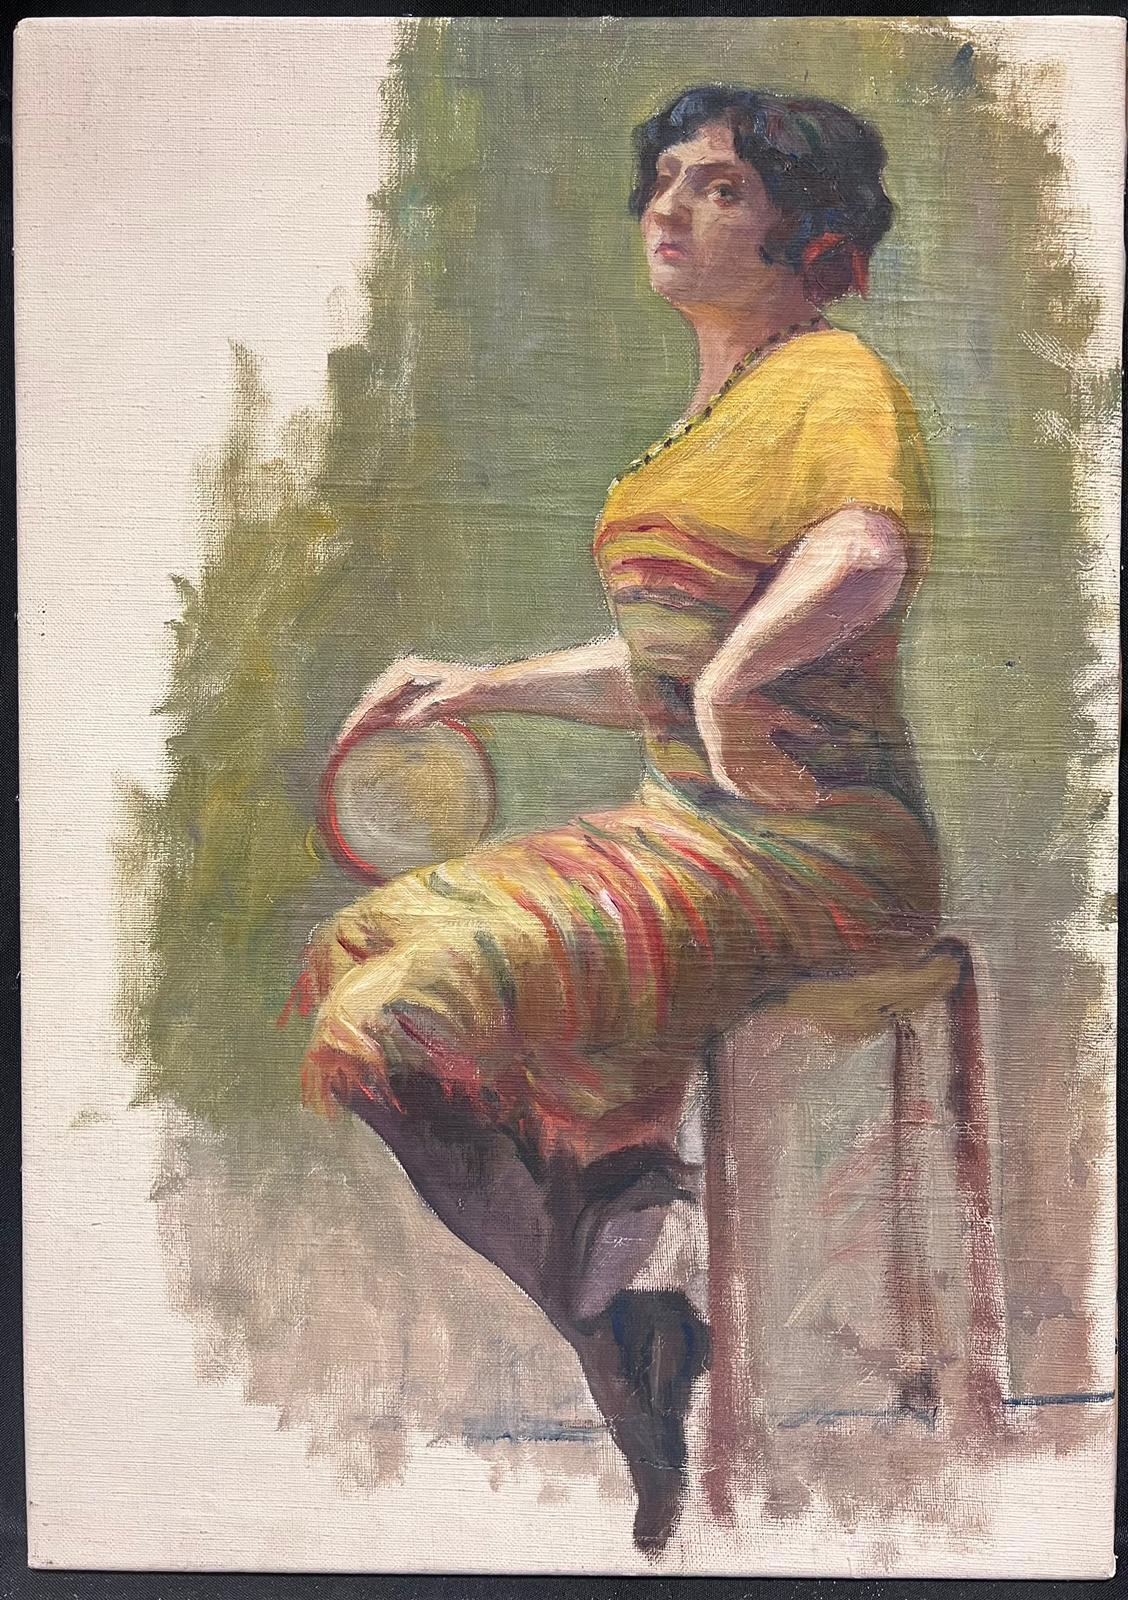 The Lady with the Tambourine
by Louise Alix (French, 1888-1980) *see notes below
oil painting on canvas unframed
measures: 20 inches high by 14 inches wide
condition: overall very good and sound, a few scuffs and marks to the surface and wear to the